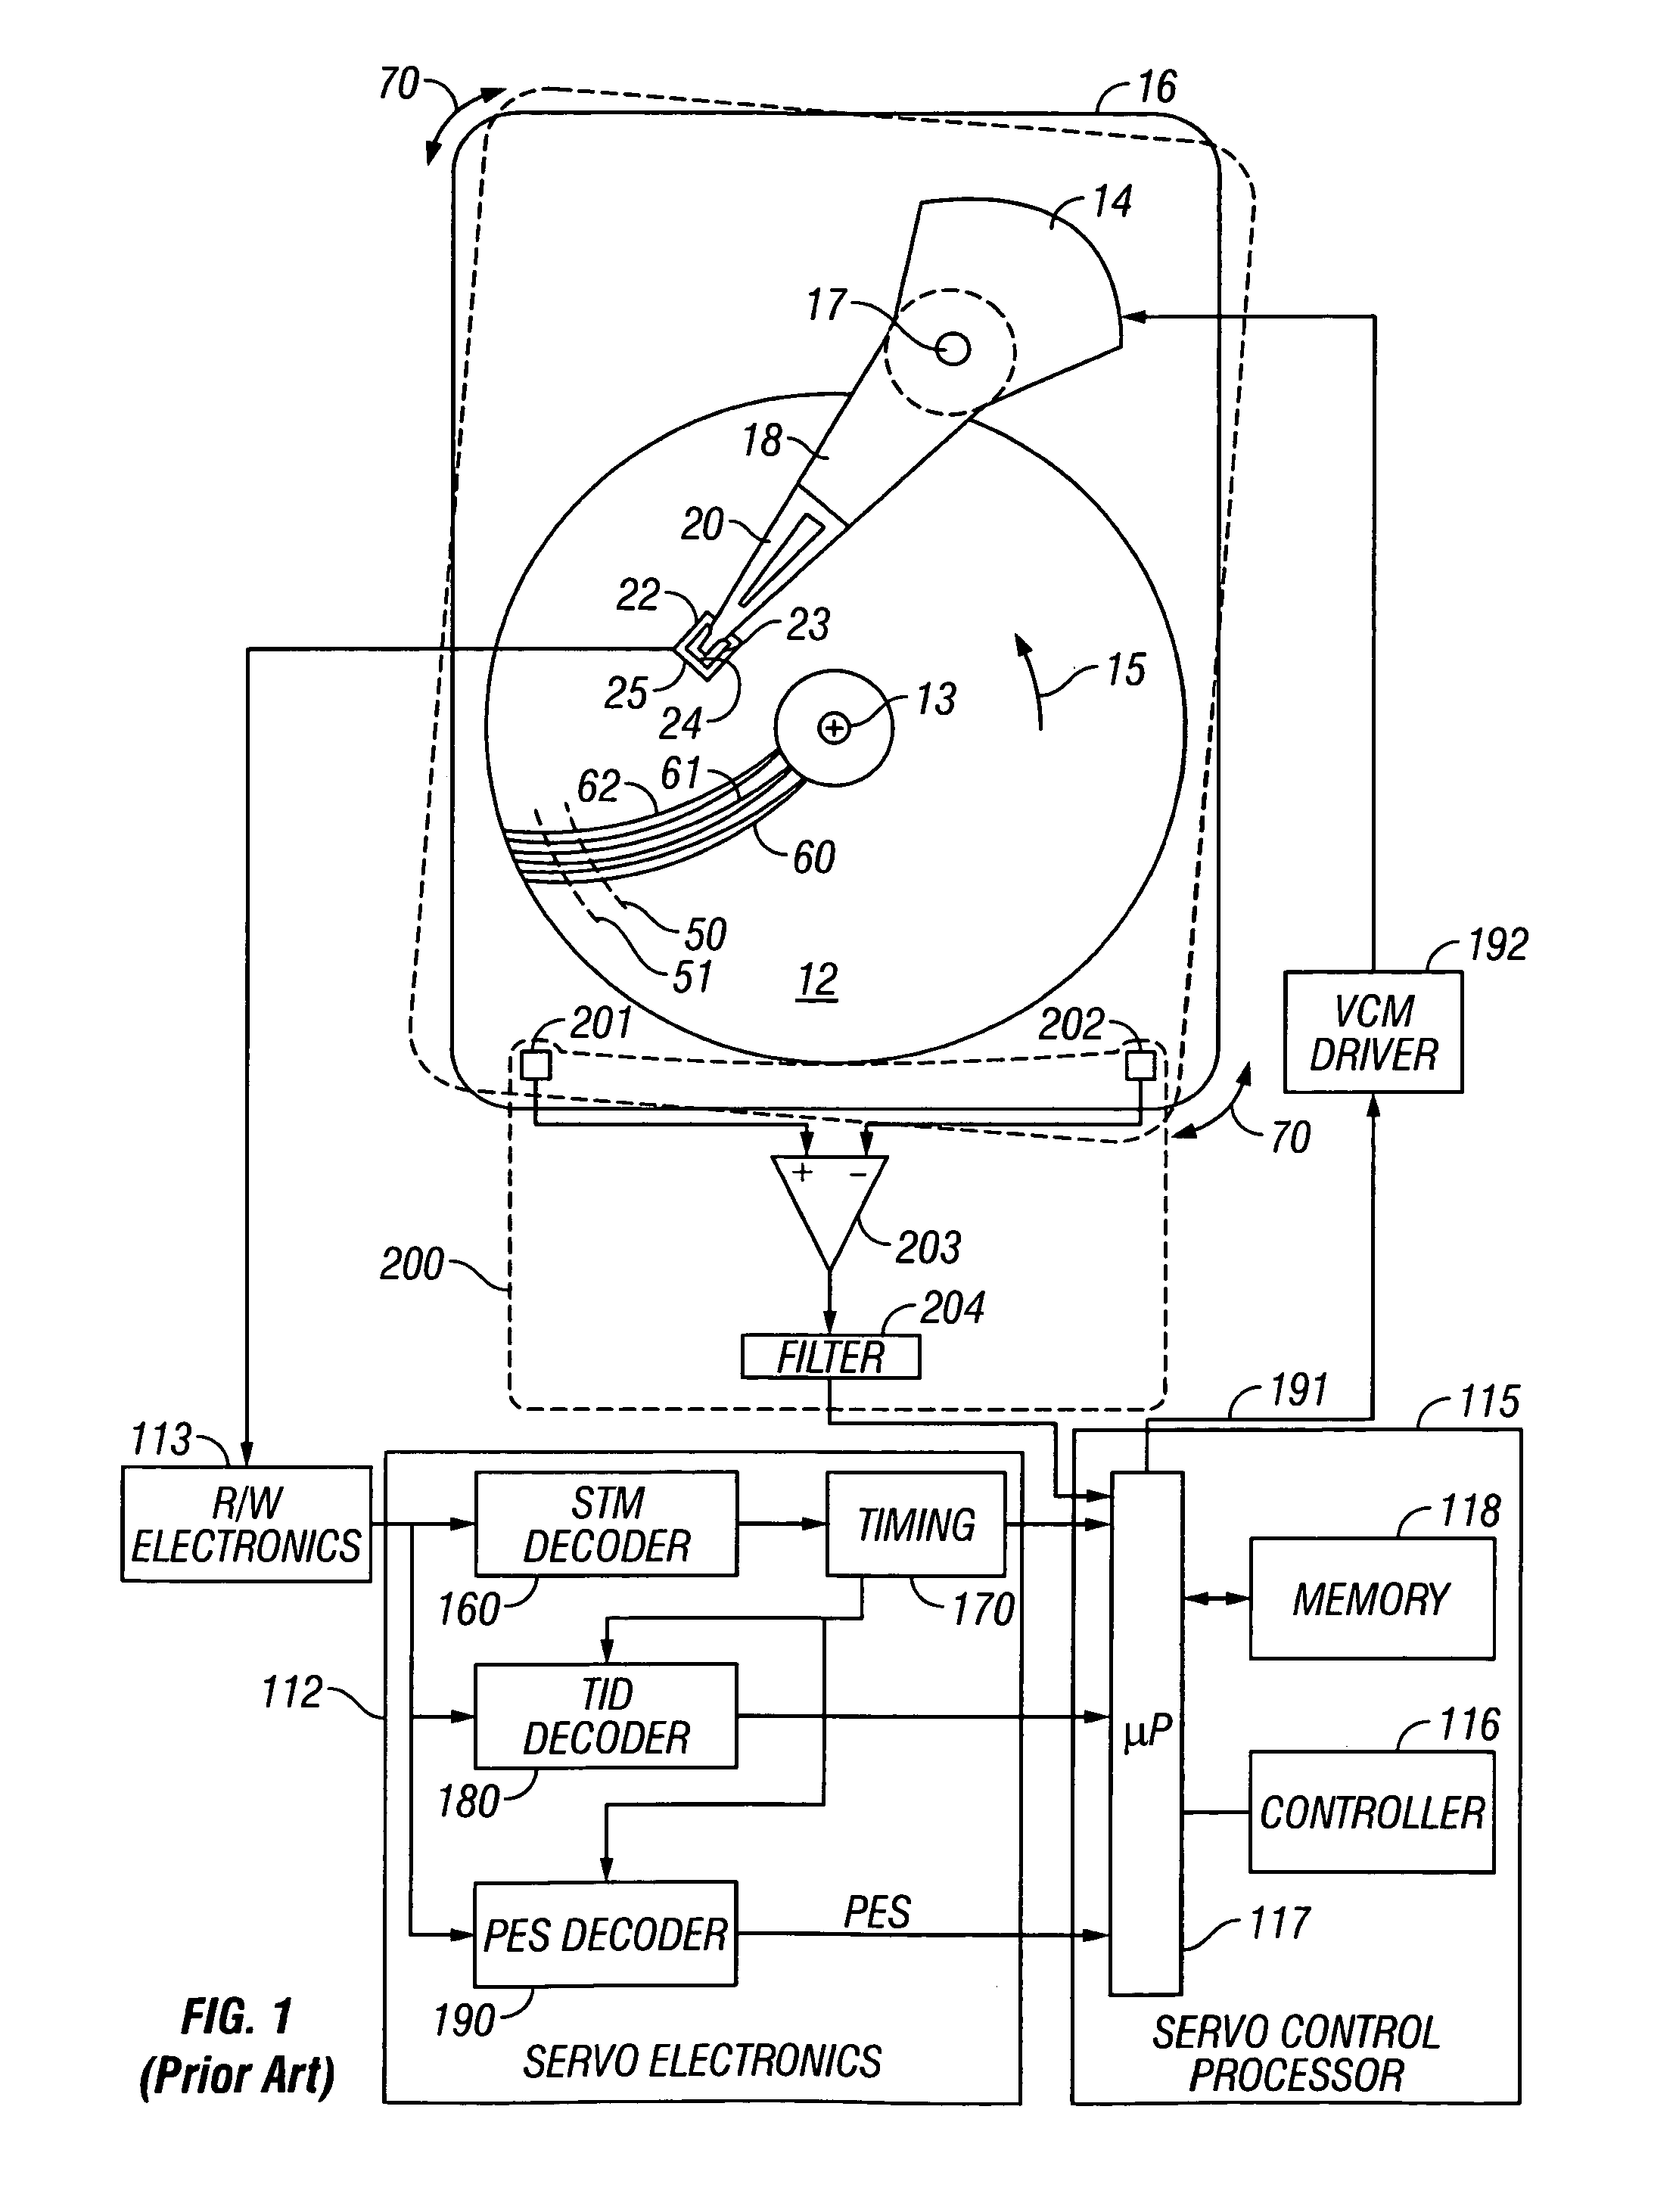 Magnetic recording disk drive with switchable rotational vibration cancellation